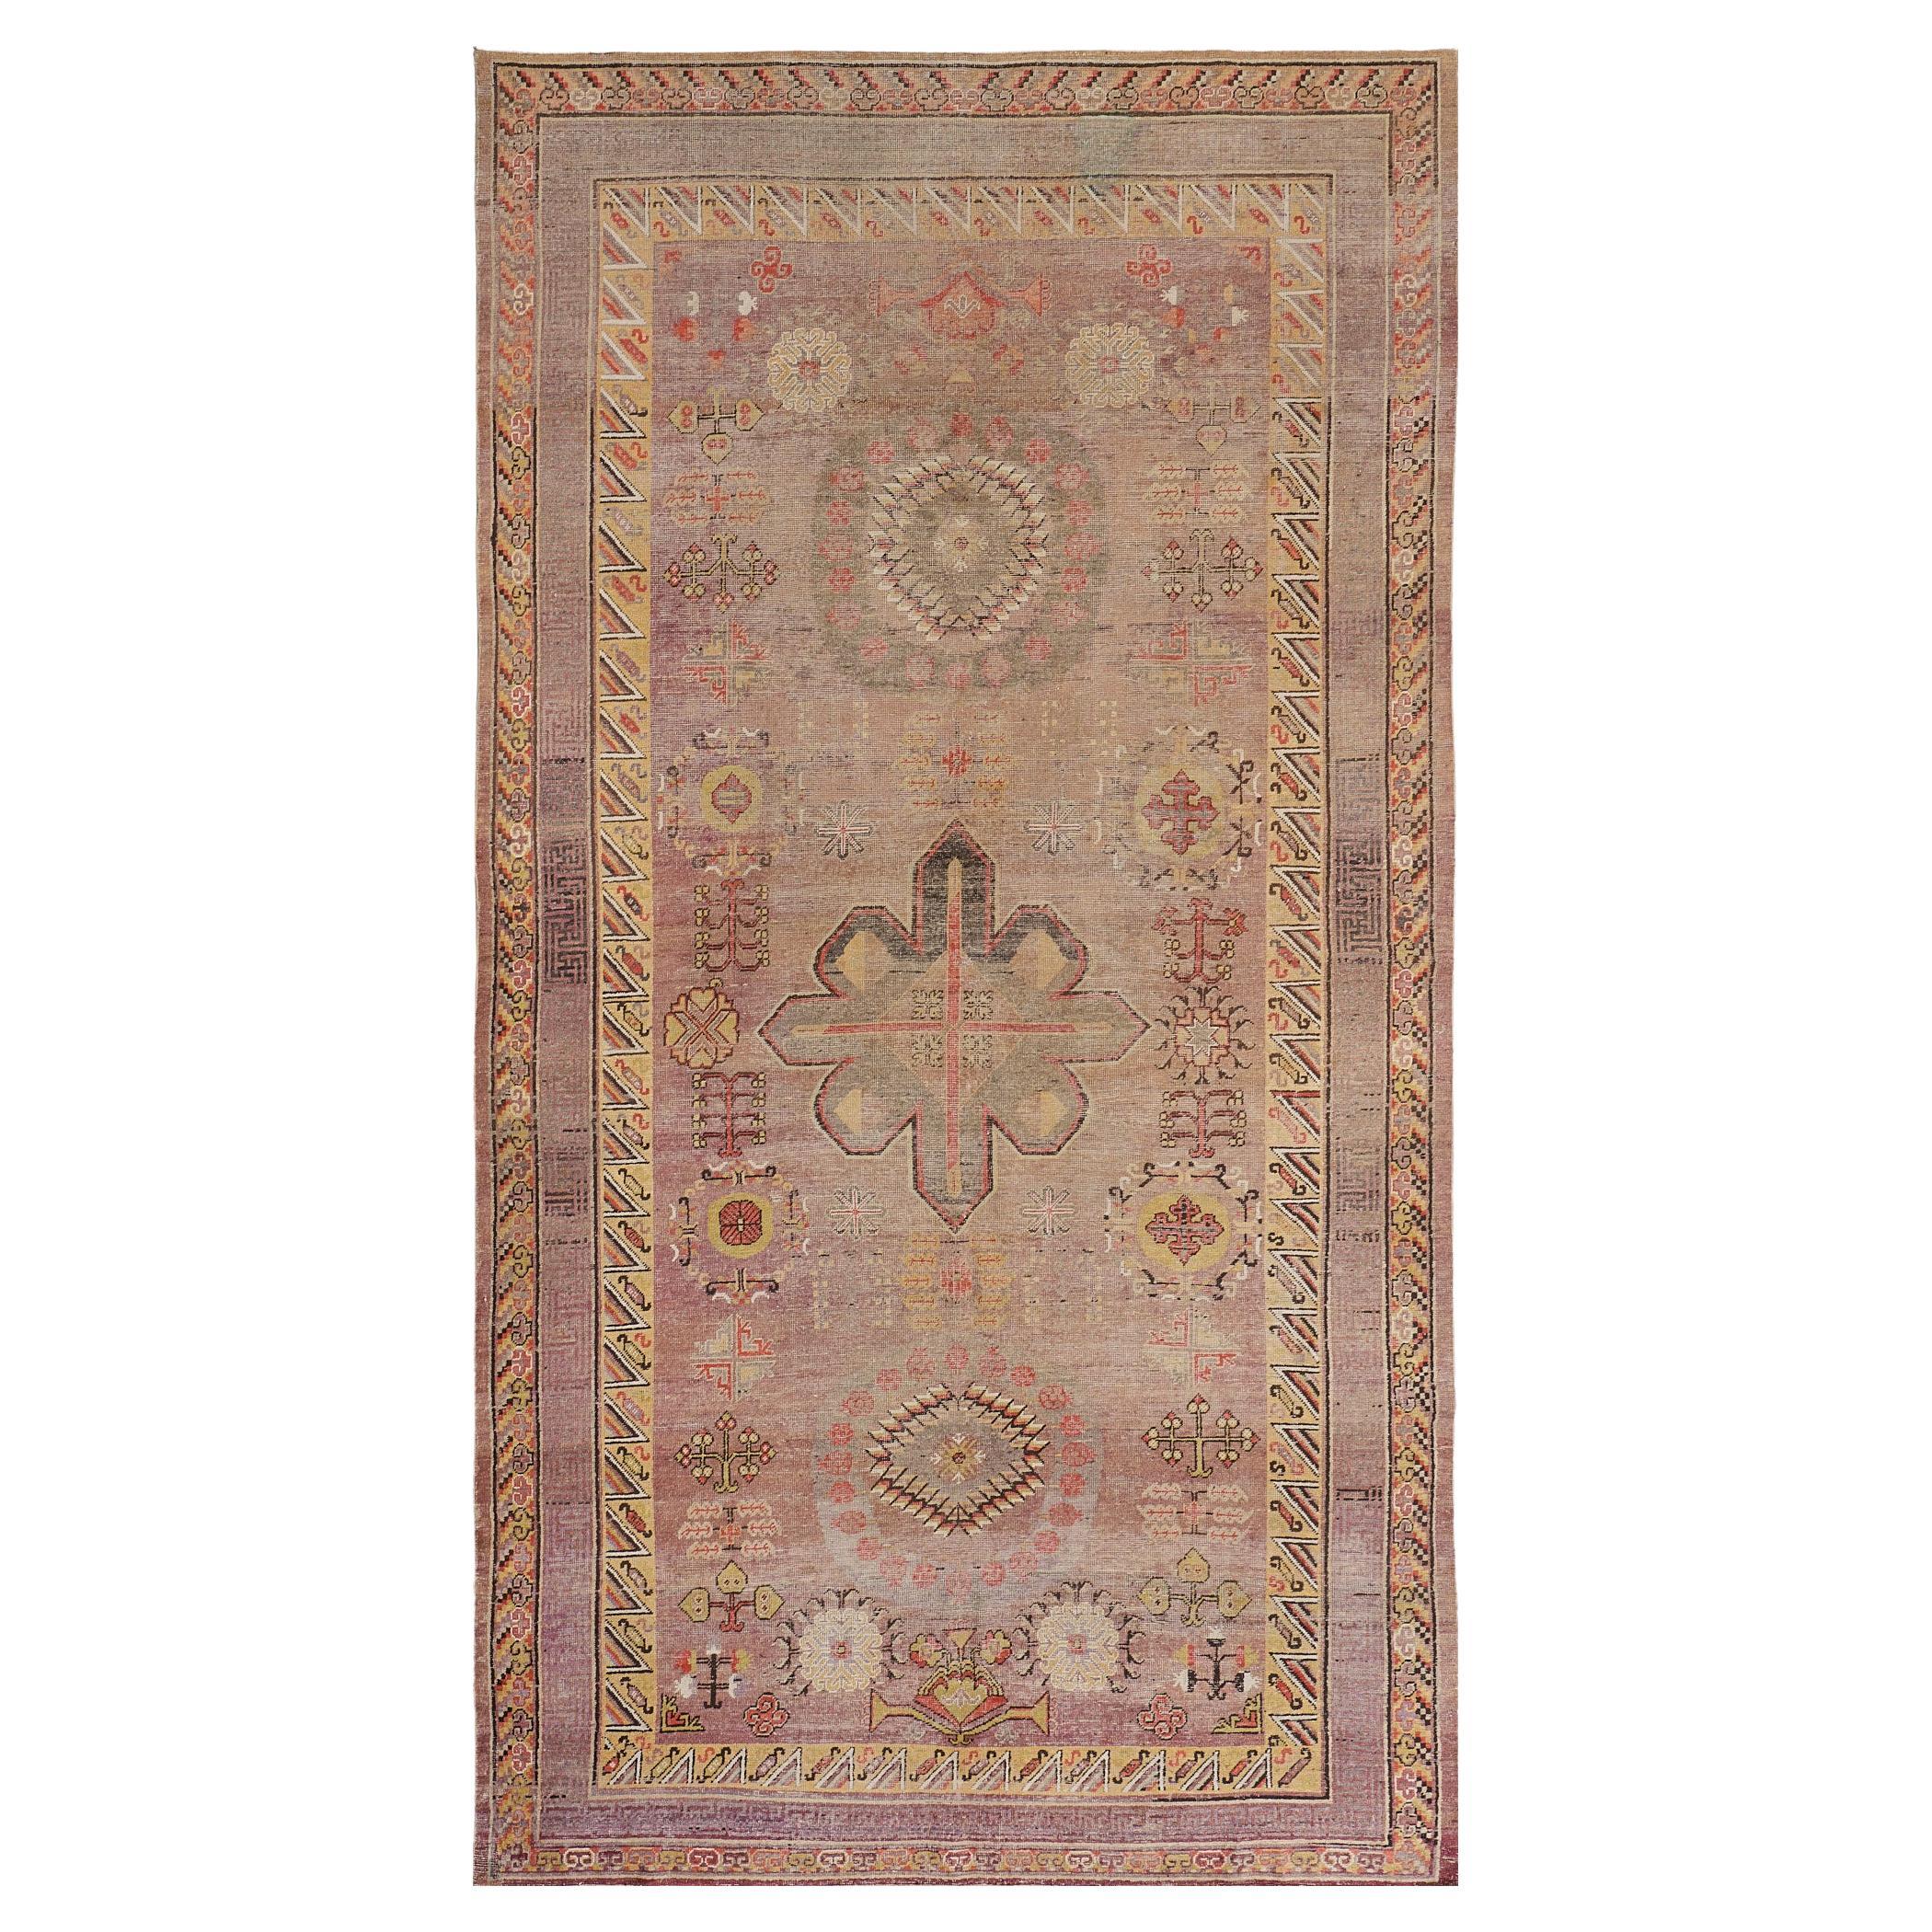 Traditional Antique Hand-Knotted Khotan Rug